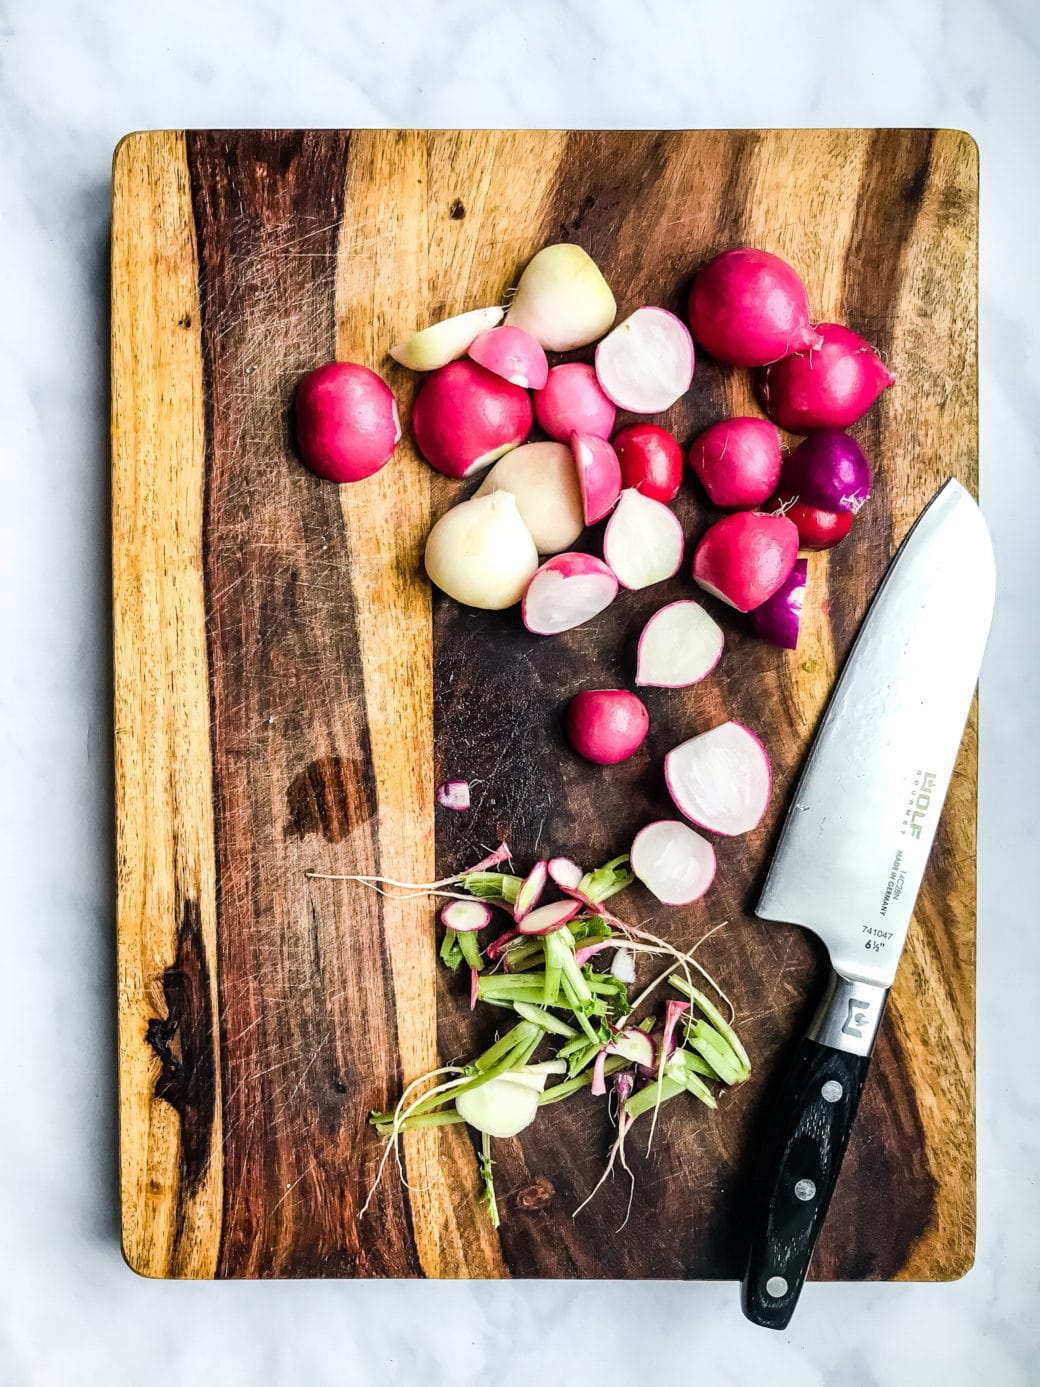 fresh radishes that have had their tops and bottoms trimmed resting on a wooden cutting board with a sharp kitchen knife